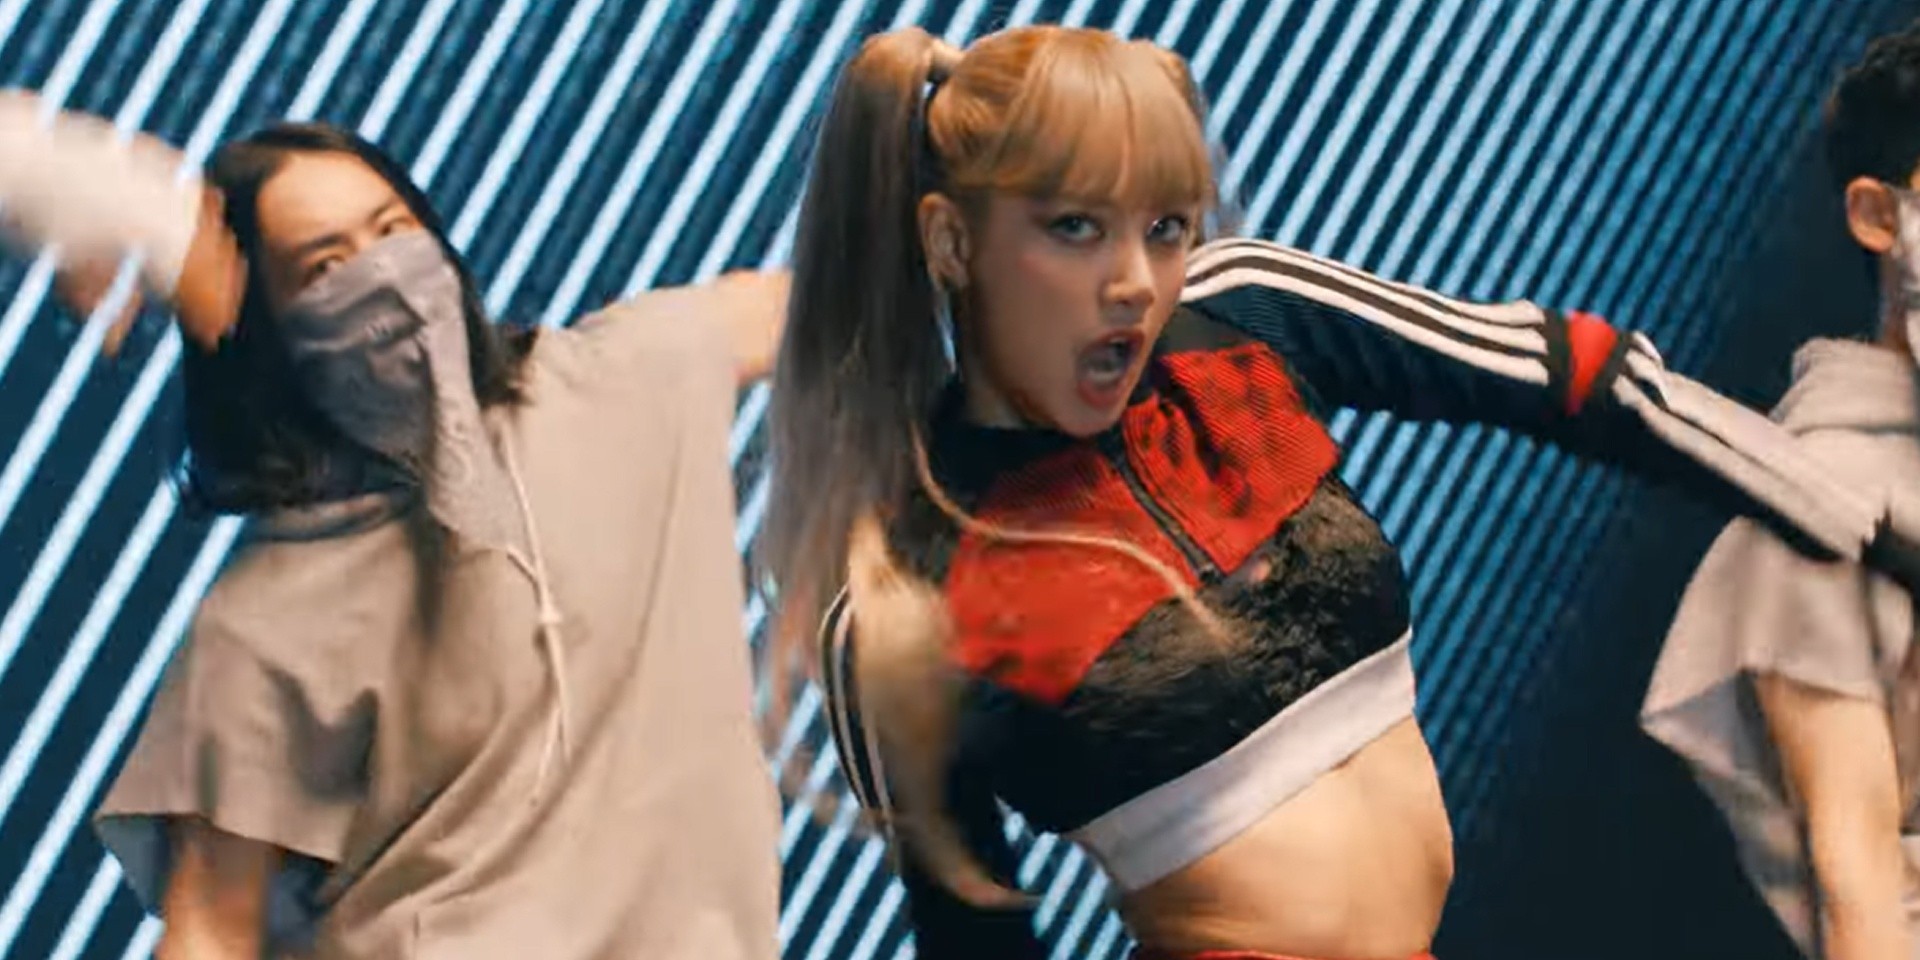 LISA makes it rain with dance performance video for 'MONEY' – watch